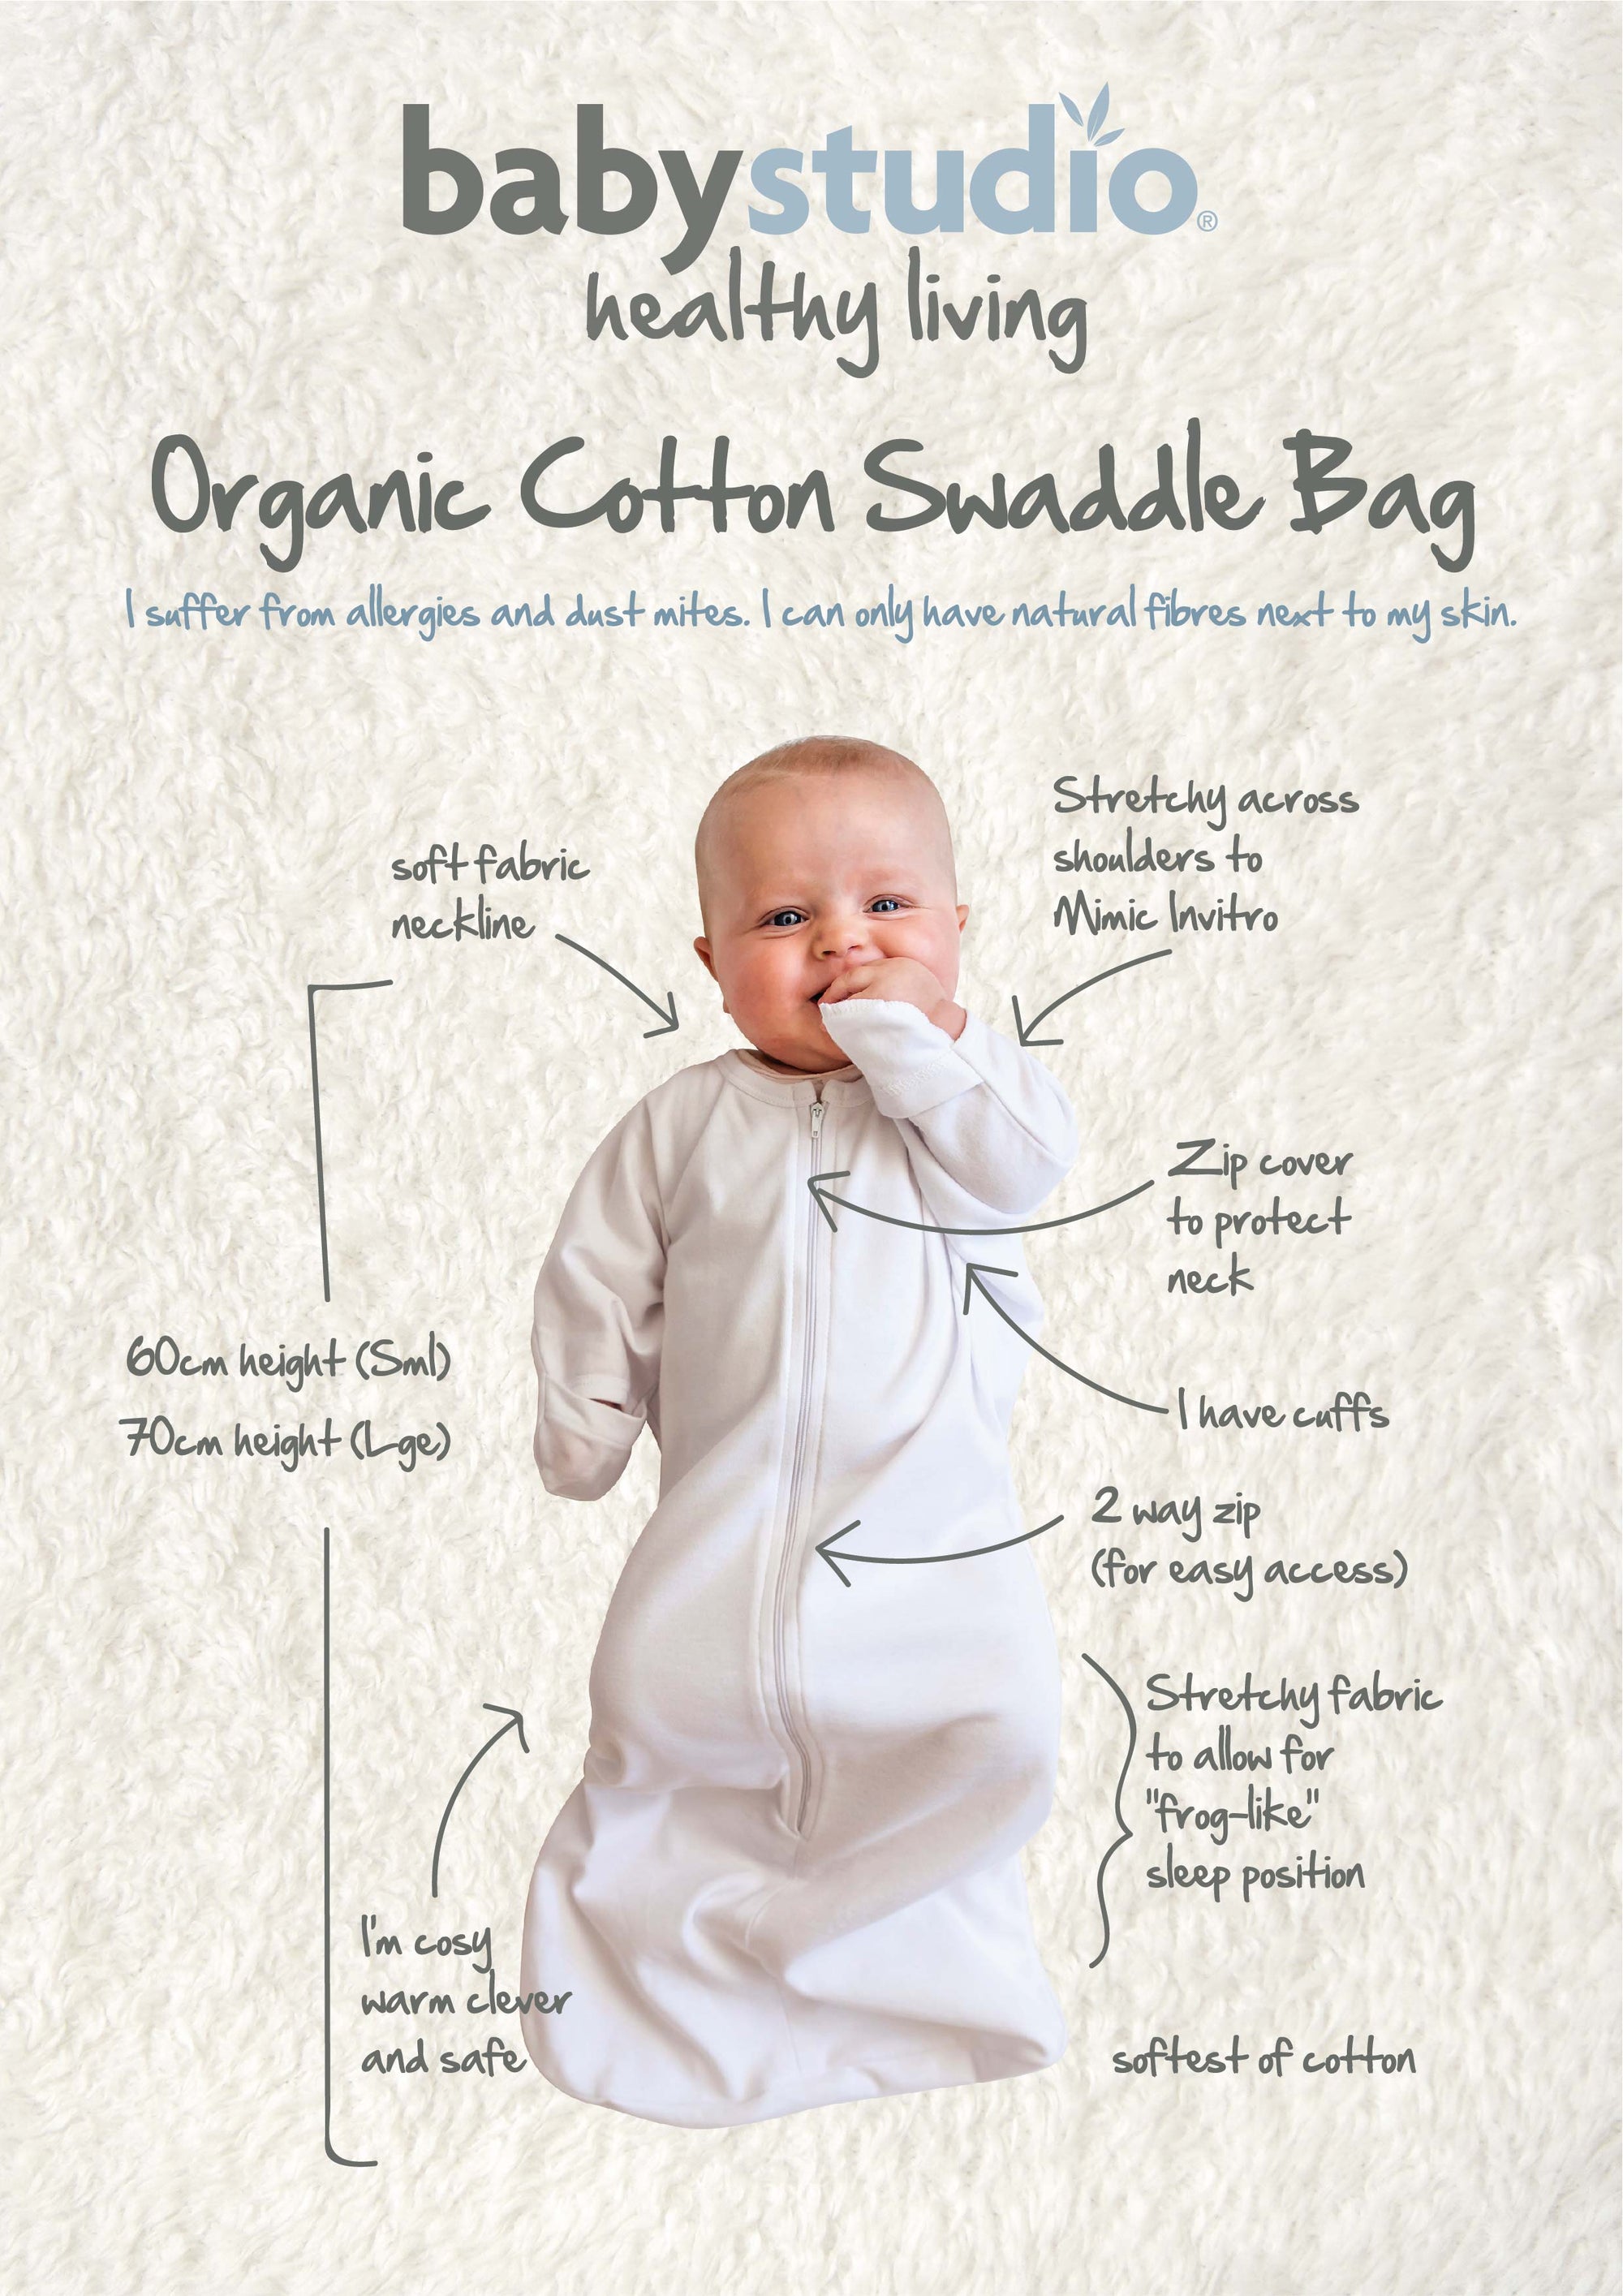 Organic Cotton all-in-one swaddlebag